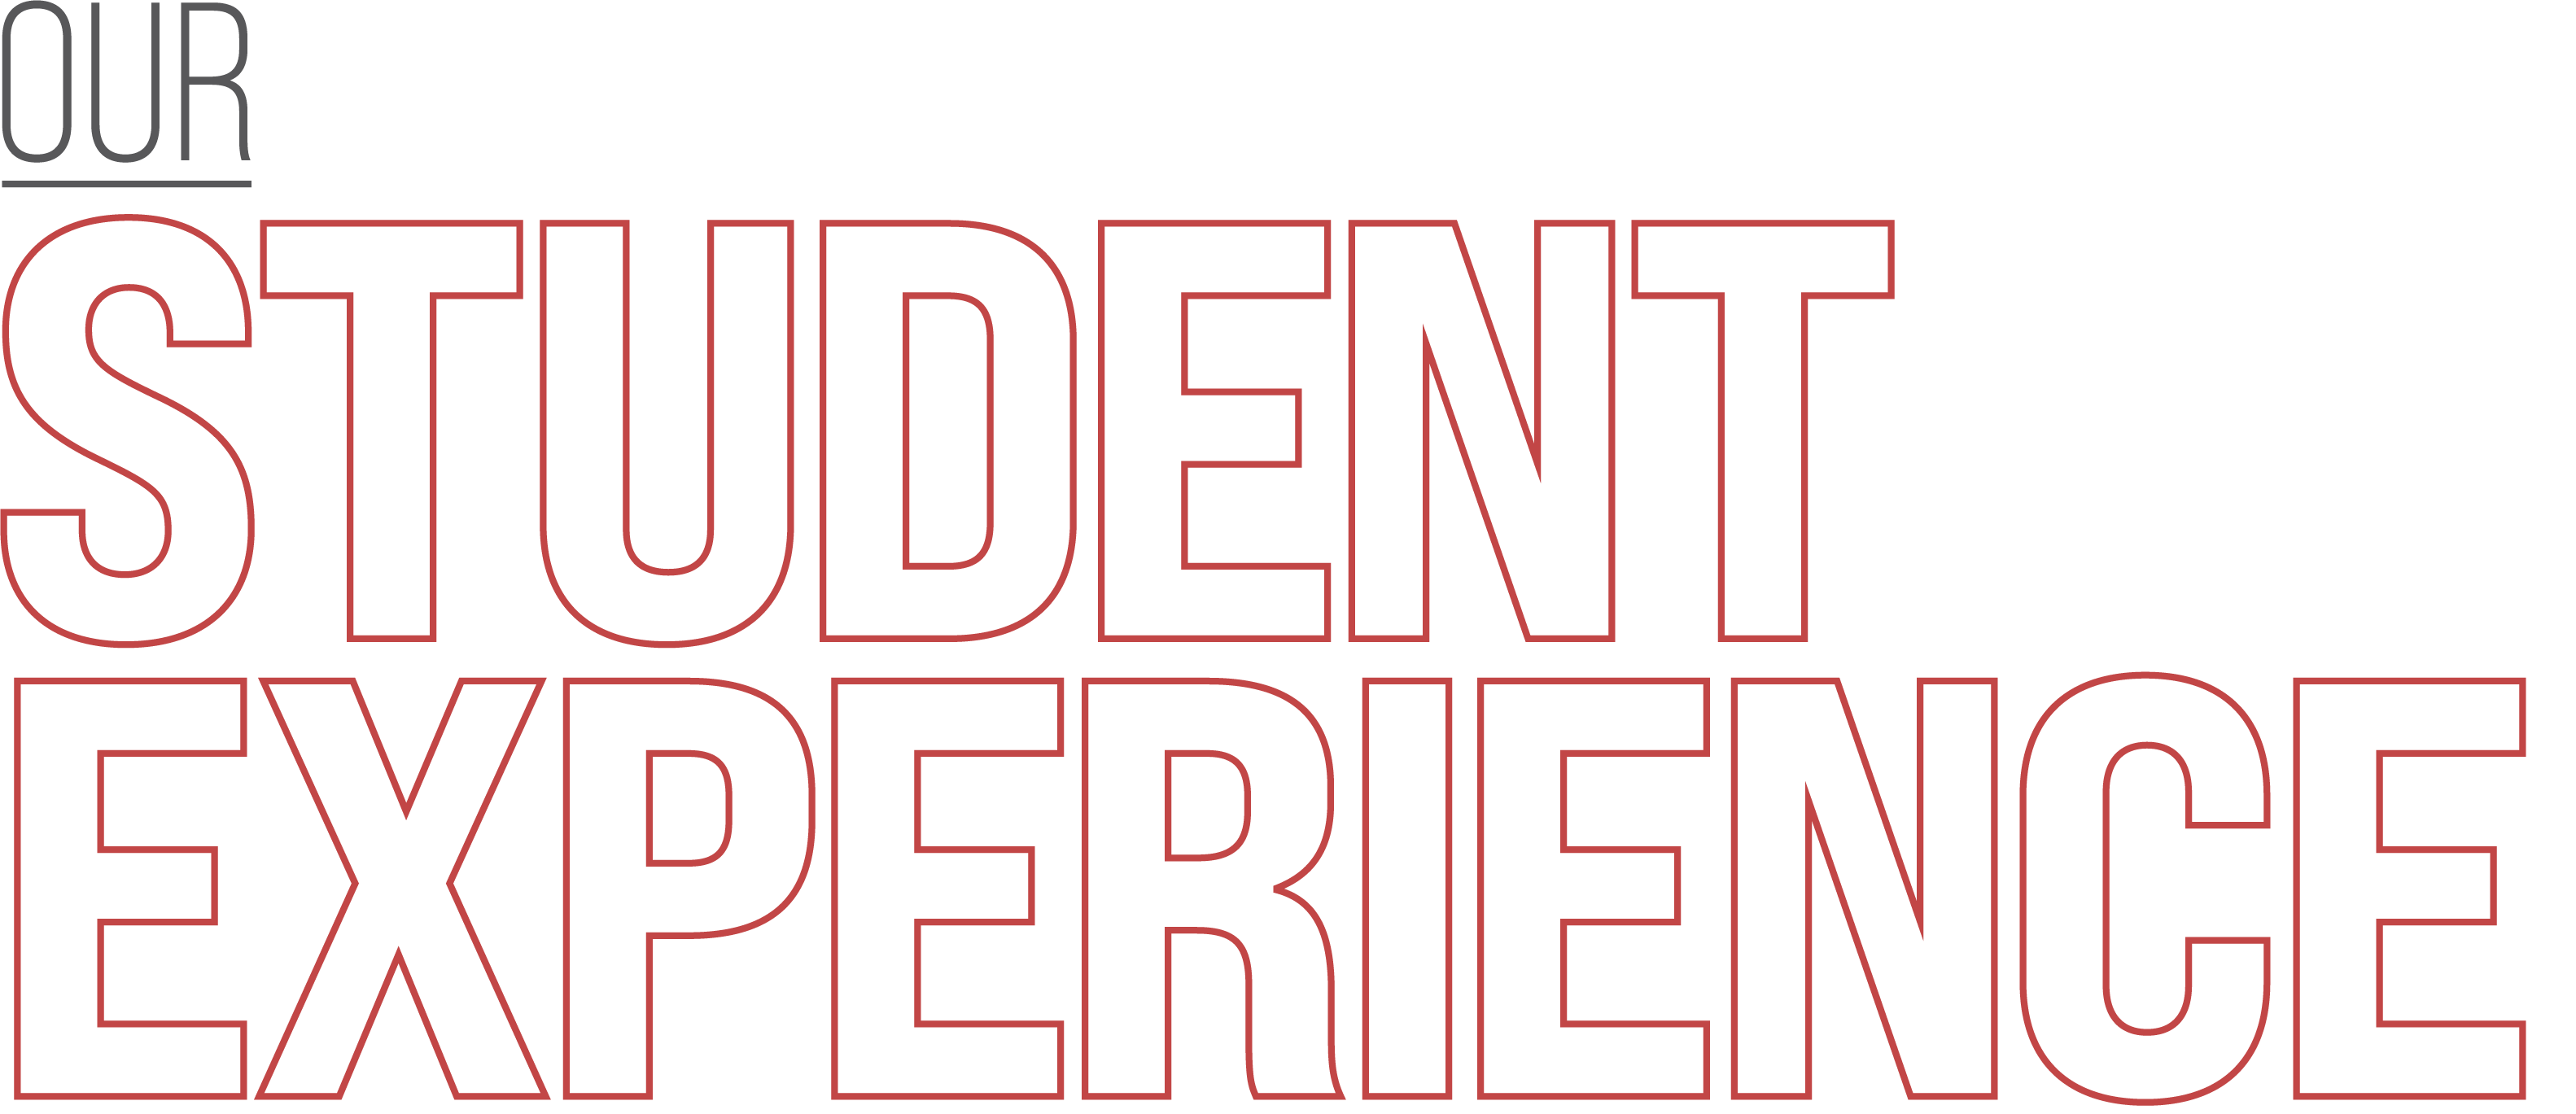 Our Student Experience